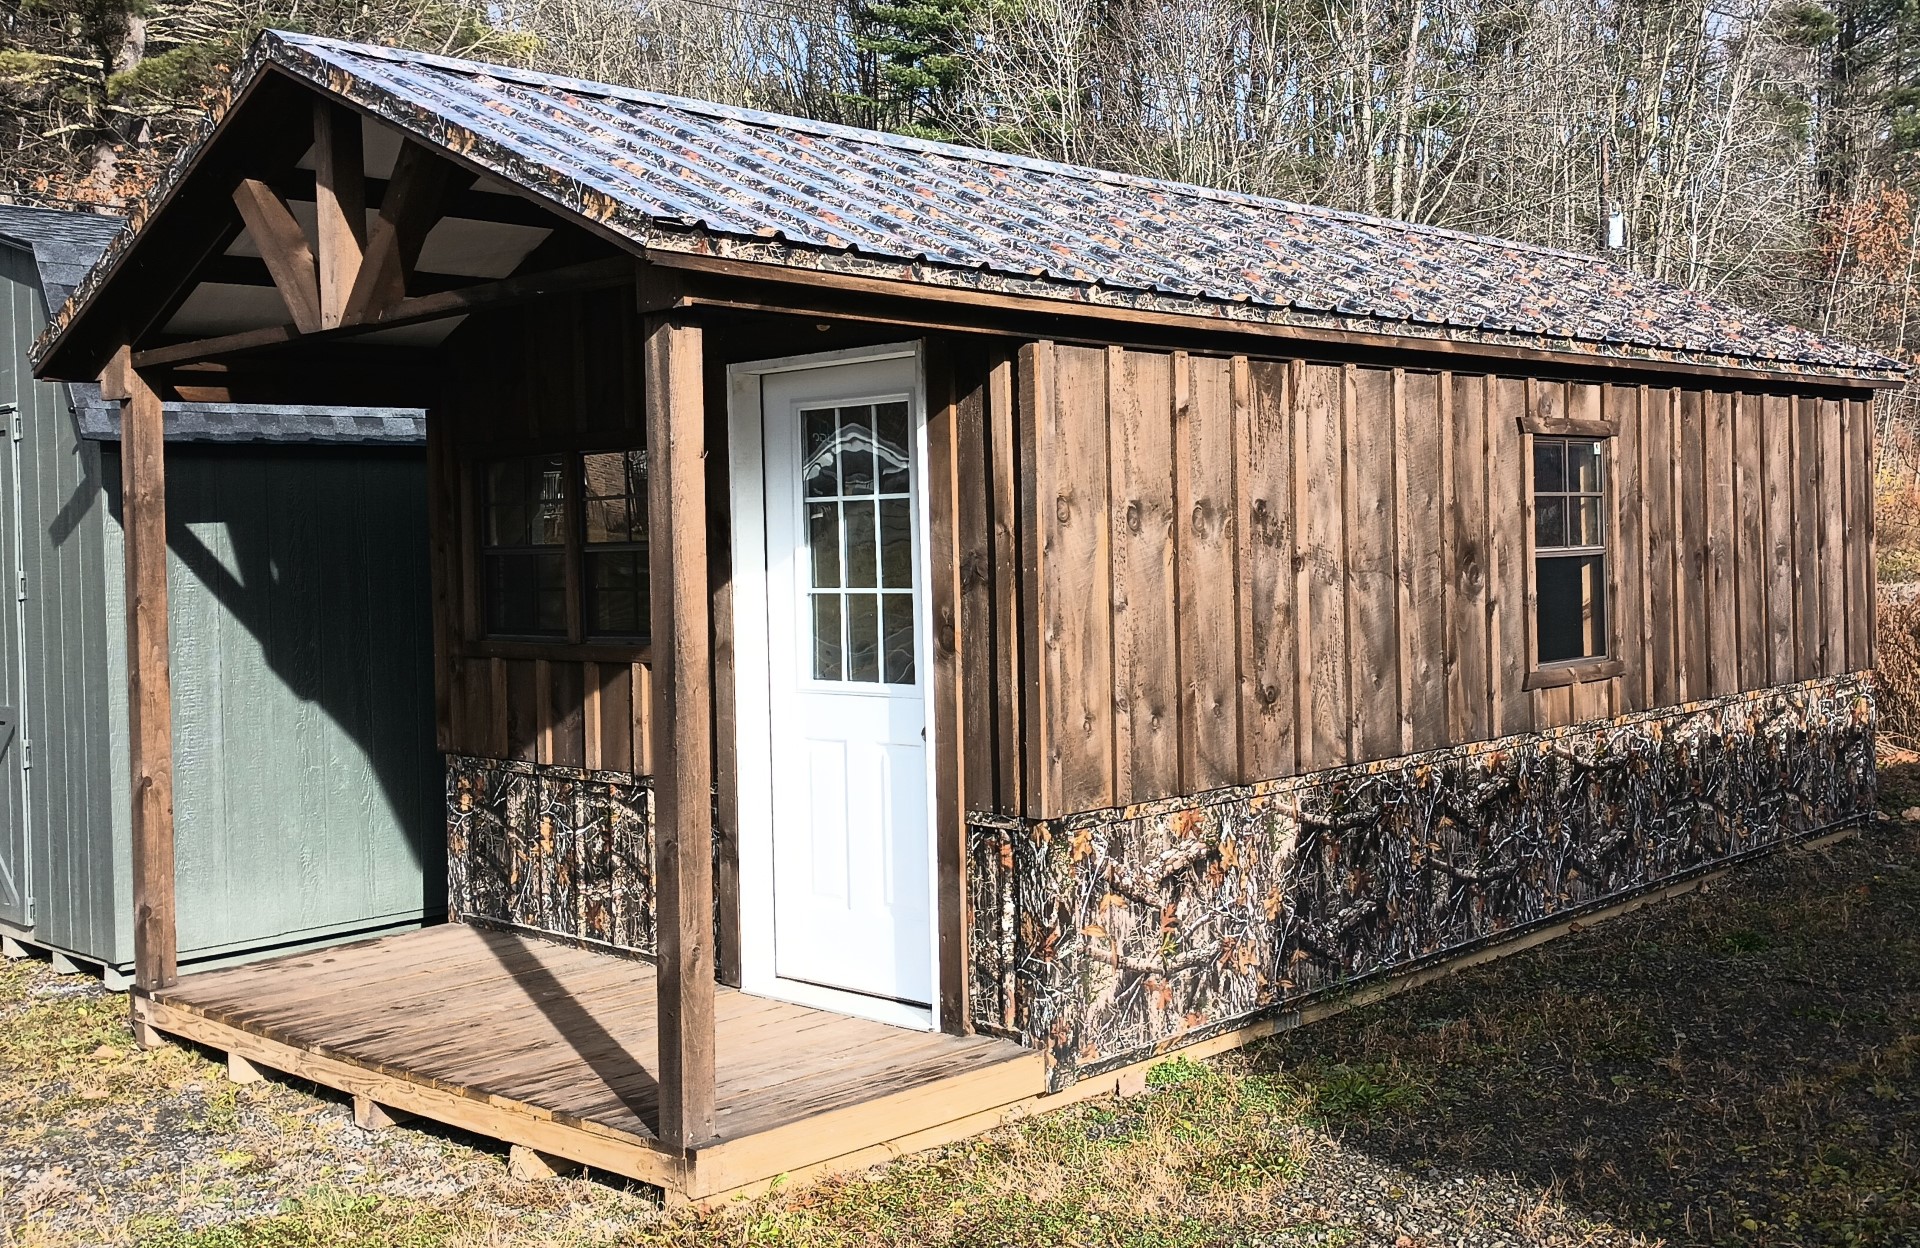 Rustic Cabin with Camo Metal Bottom and Porch